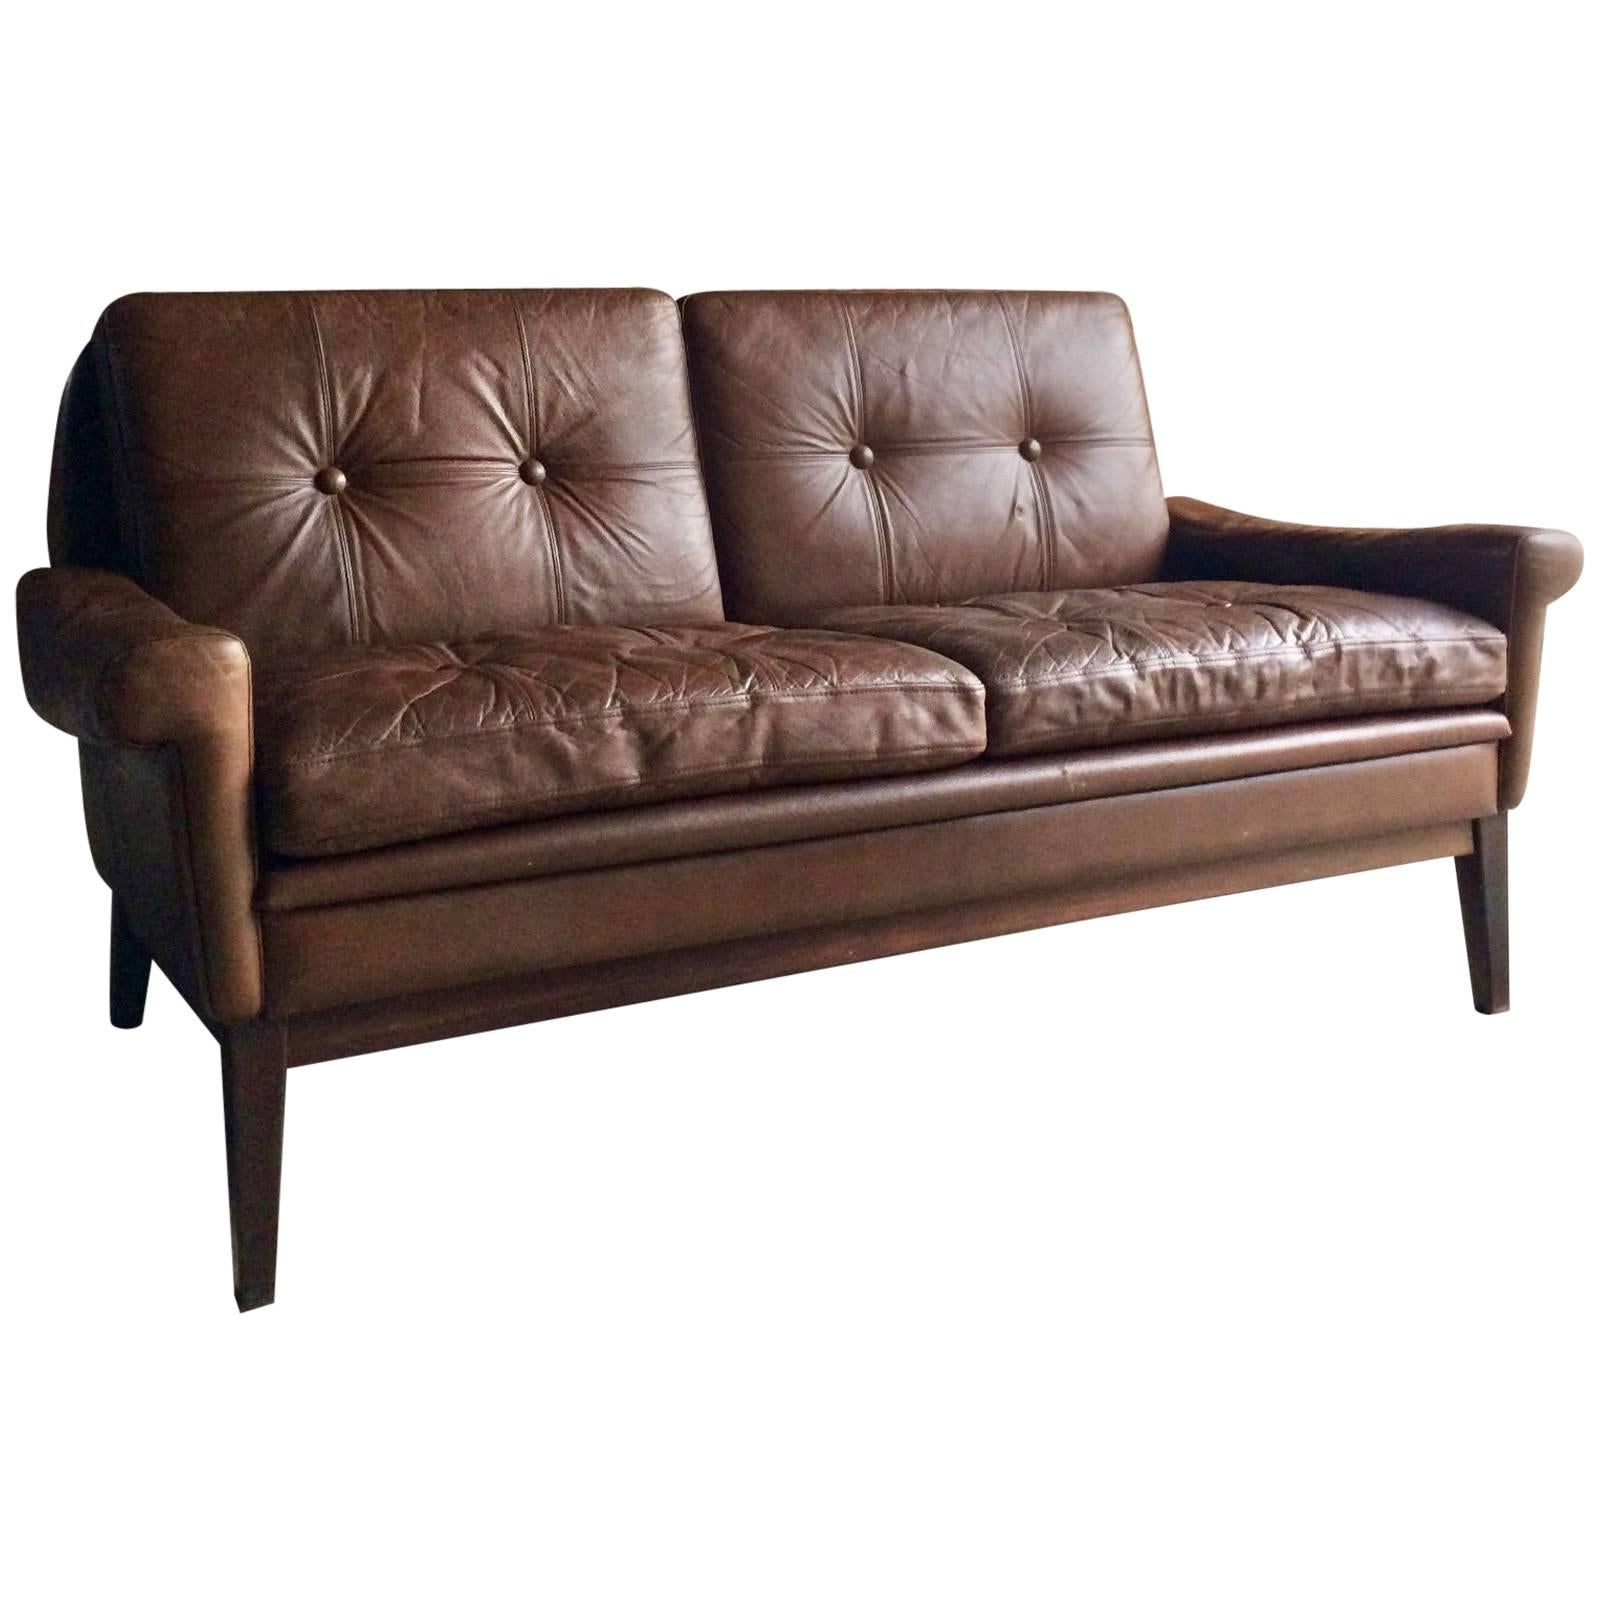 Skipper Møbler Danish Brown Leather Two-Seat Settee Midcentury, circa 1970s